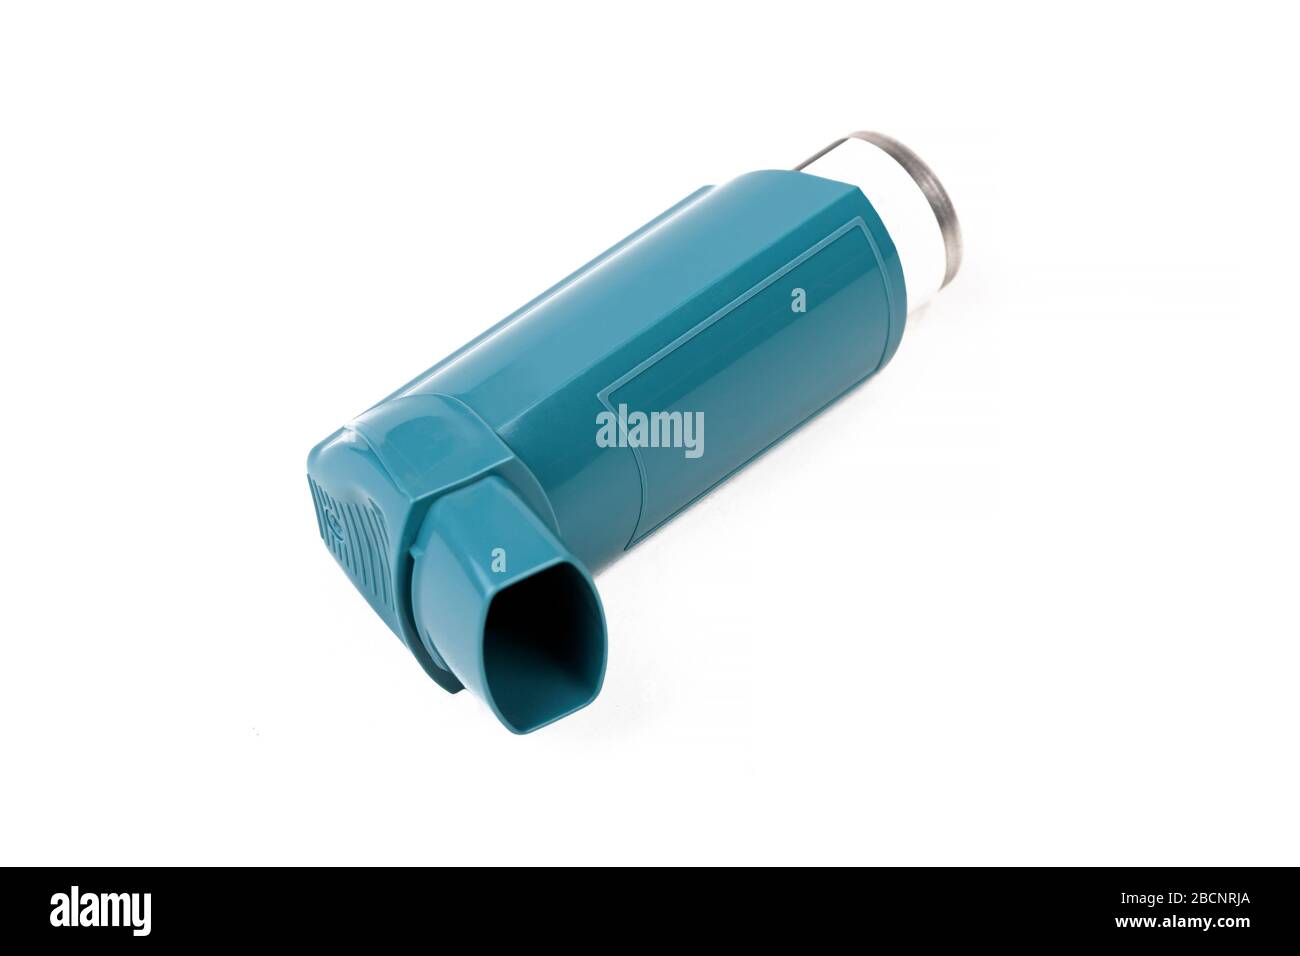 Simple blue asthma inhaler medicine, object isolated on white, cut out. Asthmatic issues, health care, cough medicine, lung diseases, allergies Stock Photo